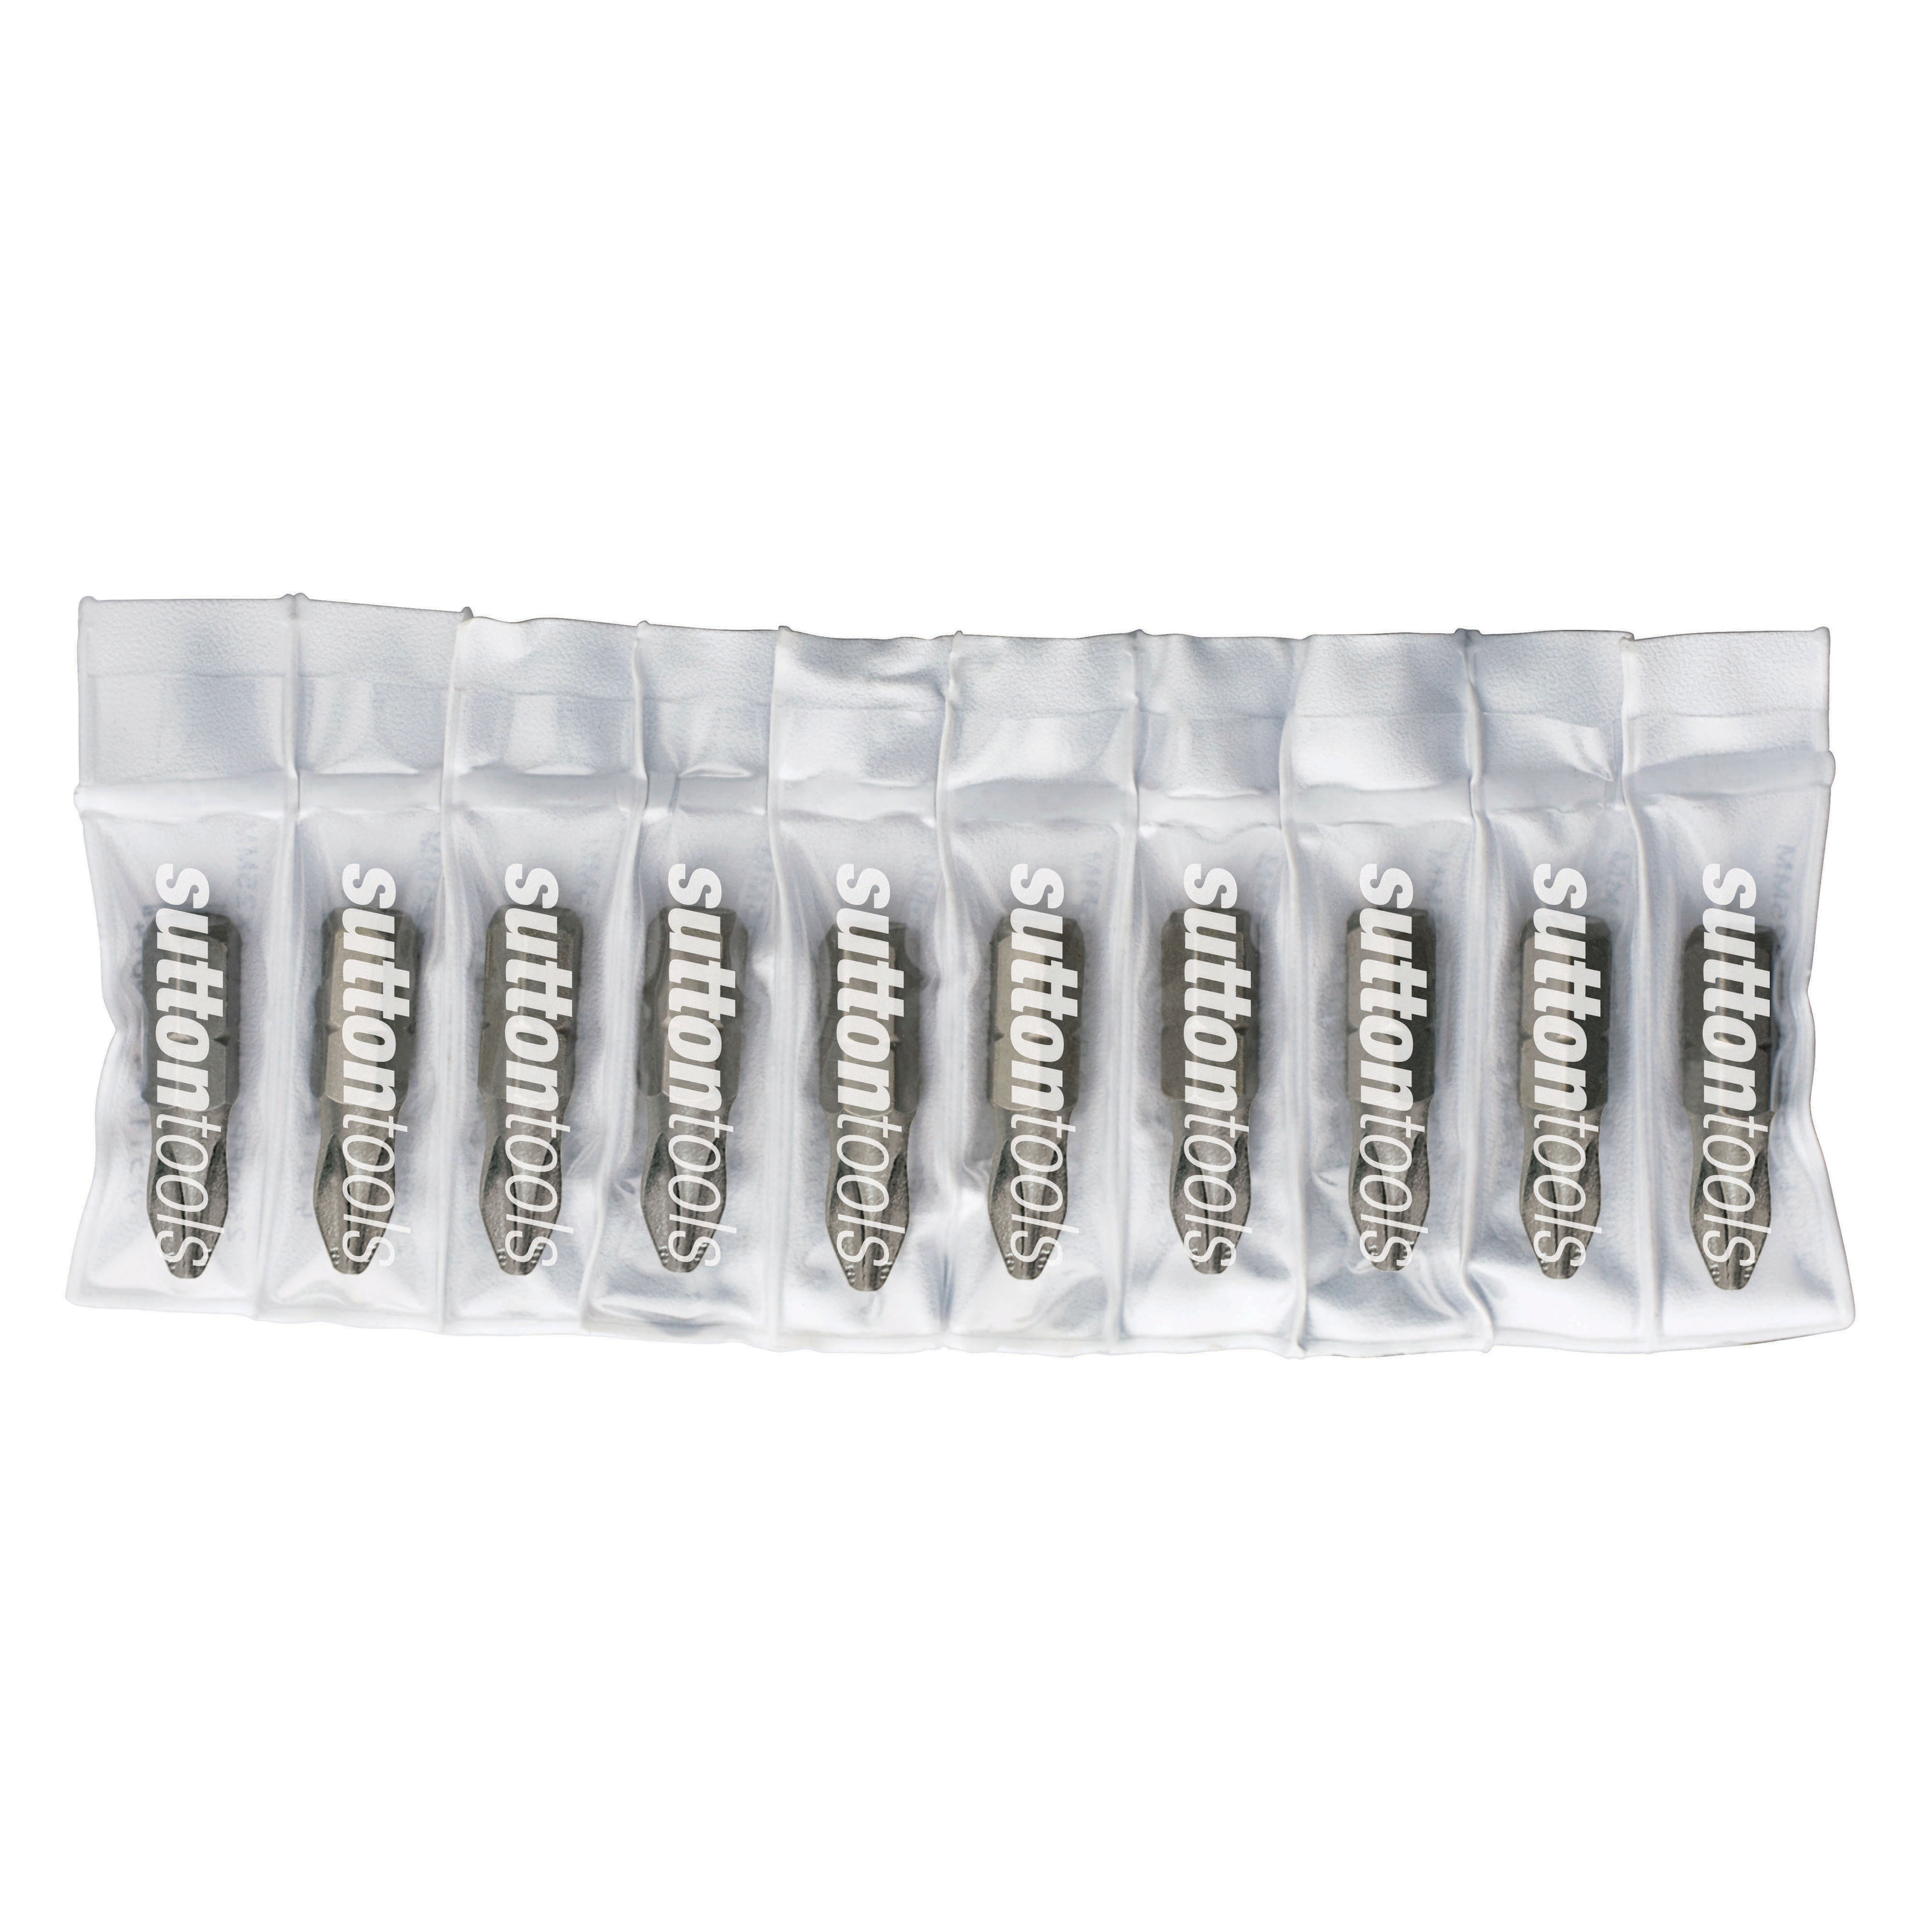 6 x SUTTON SUPABIT PHILLIPS HEAD PH2 x 75mm DOUBLE ENDED BITS FOR IMPACT DRIVERS 